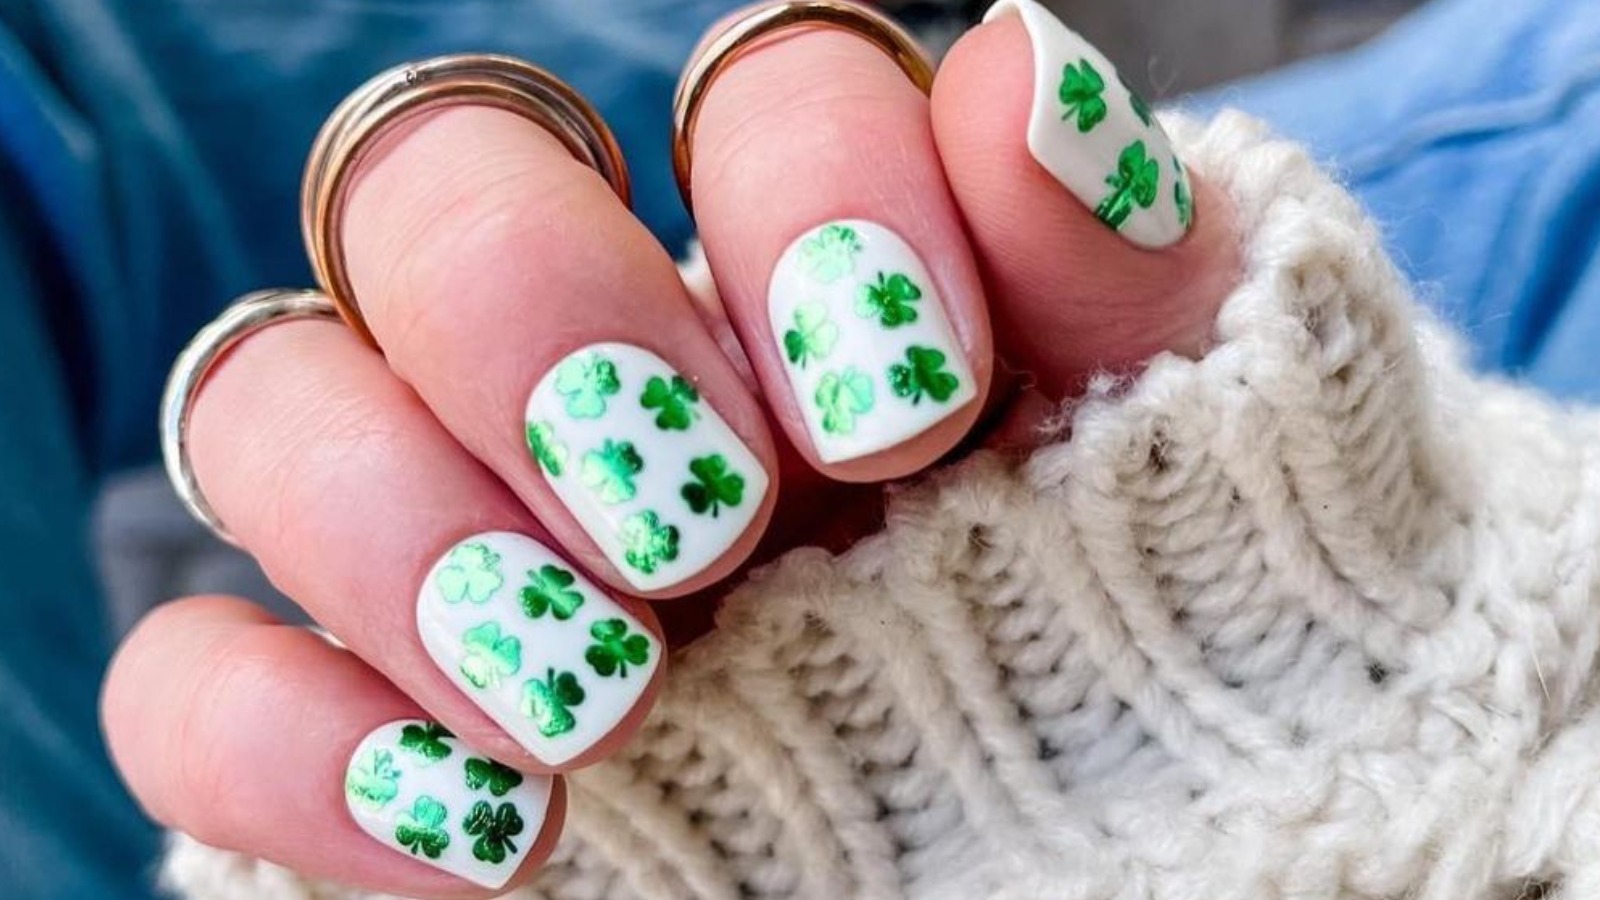 Get Into The Party Mood With These St. Patrick's Day Nail Art Ideas | BEAUTY